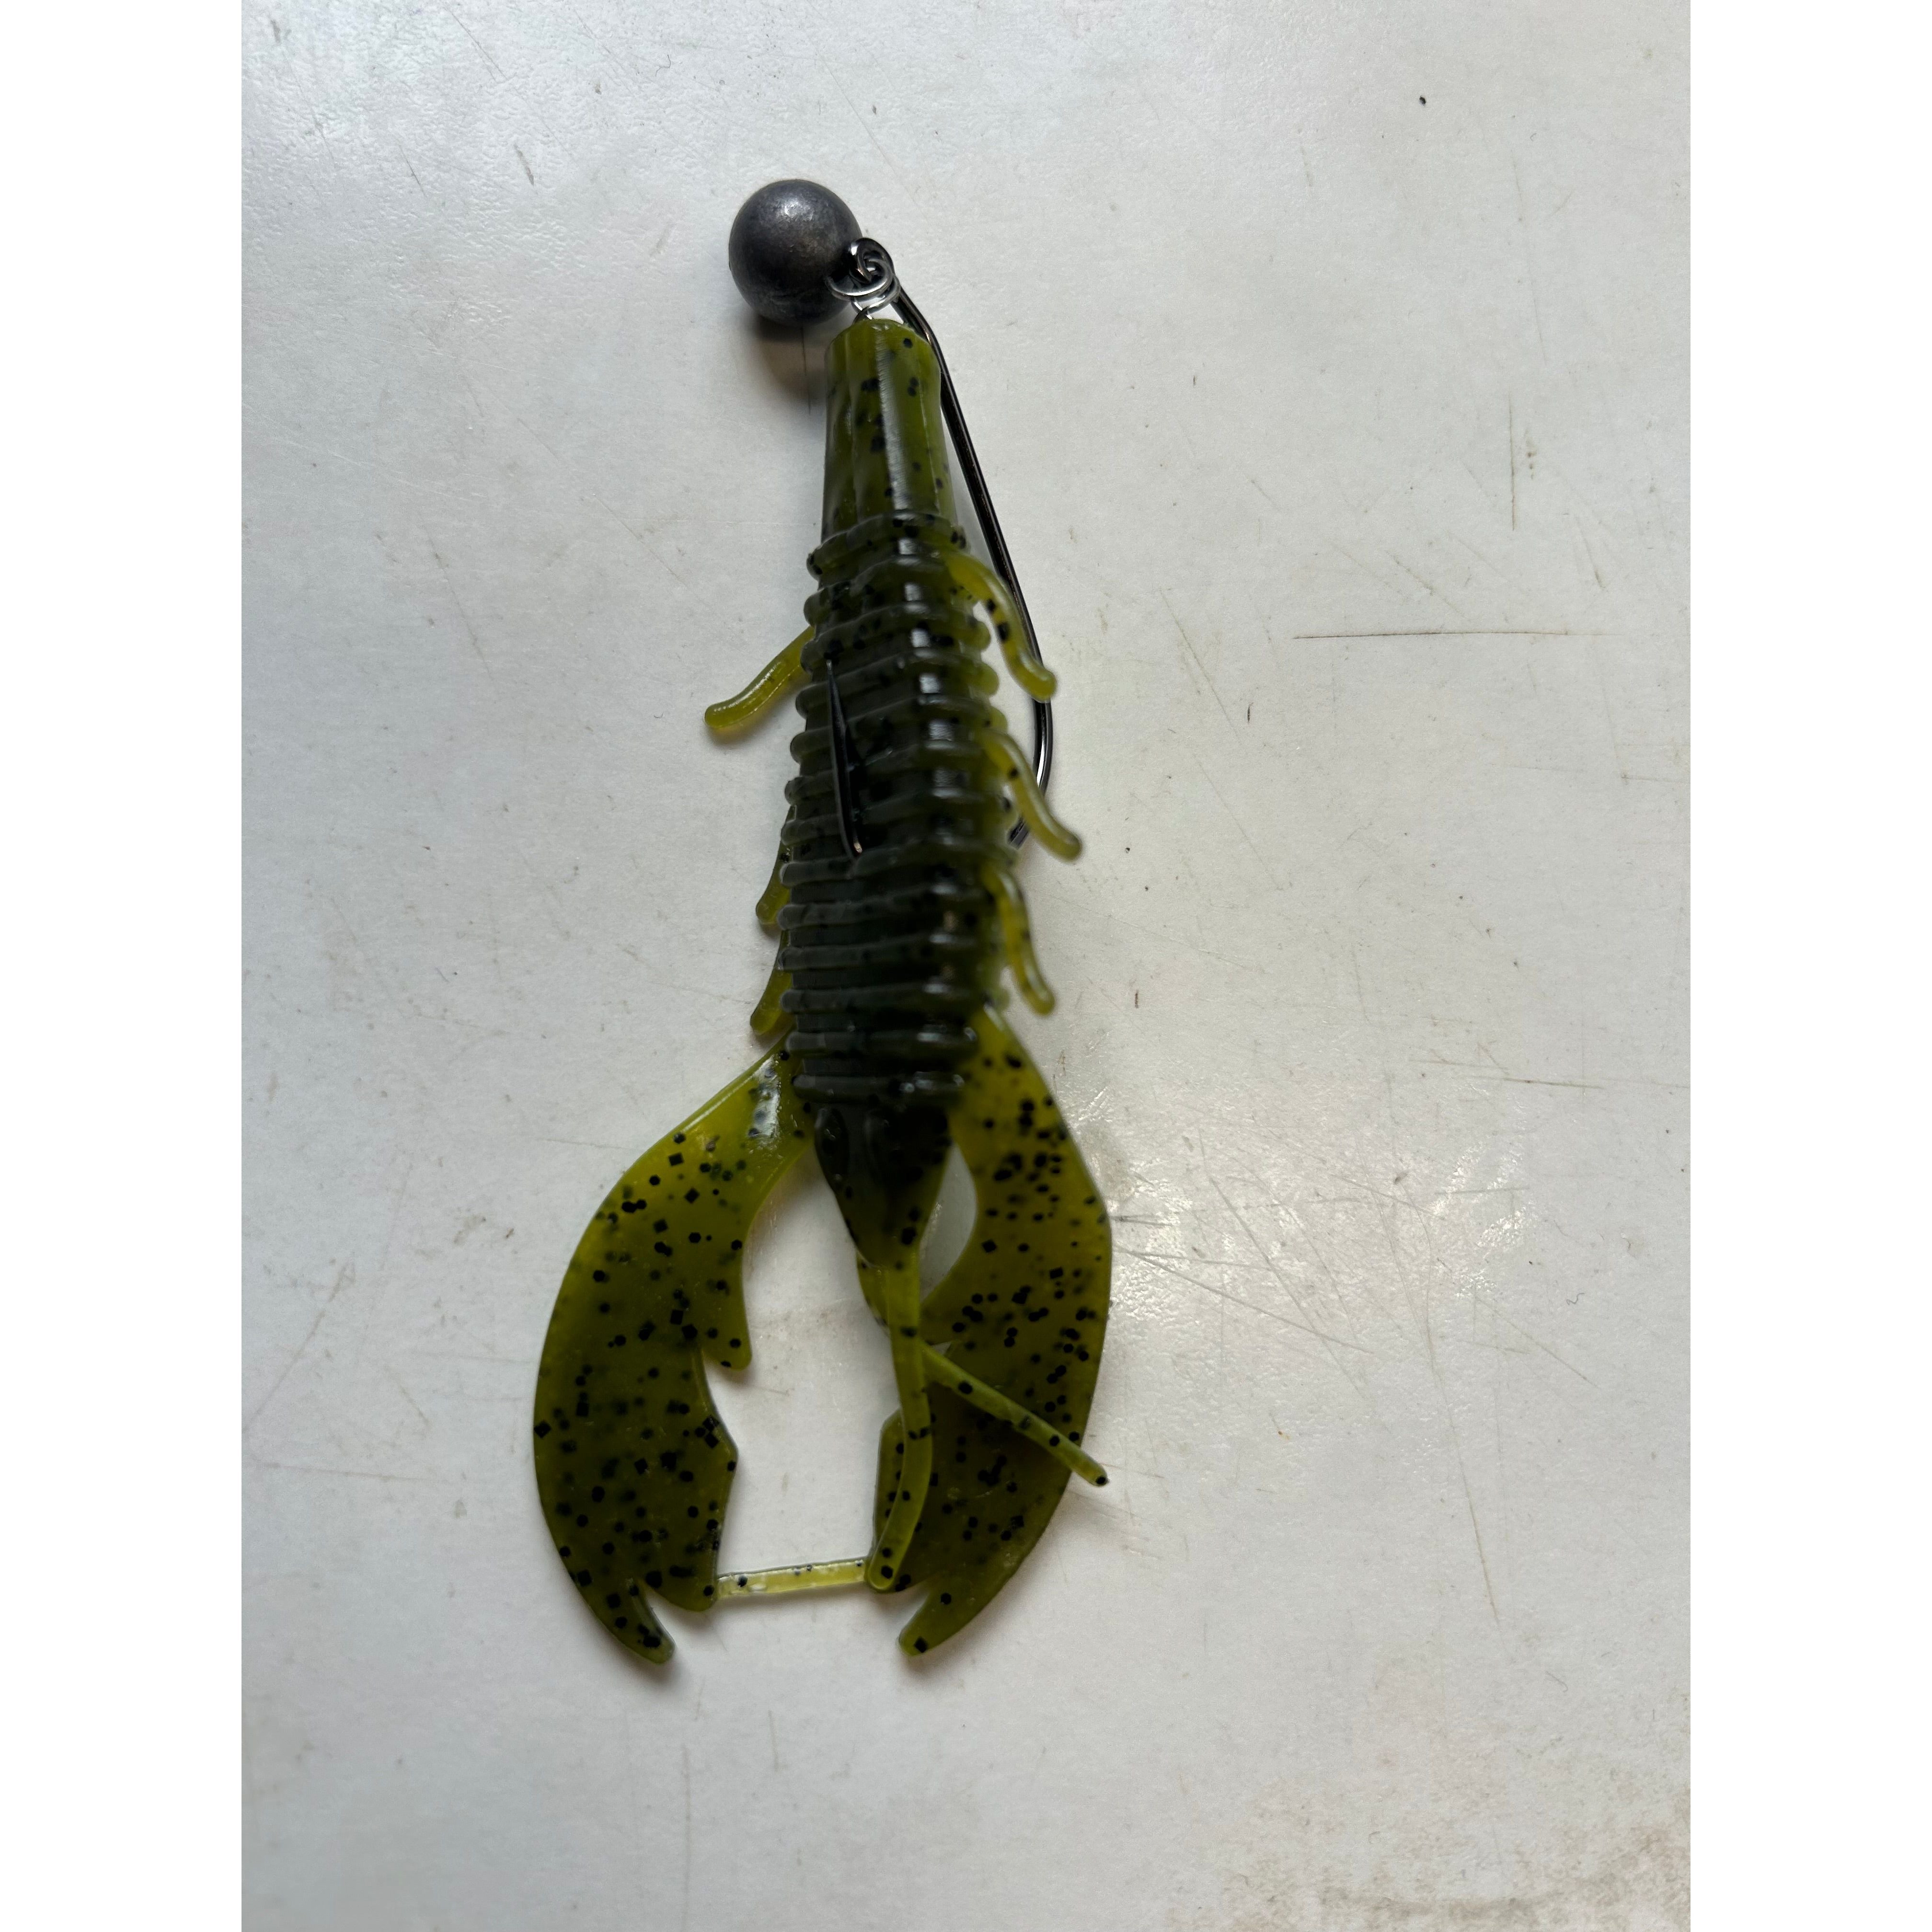 Small Creature Bait Bass Lures & Sets